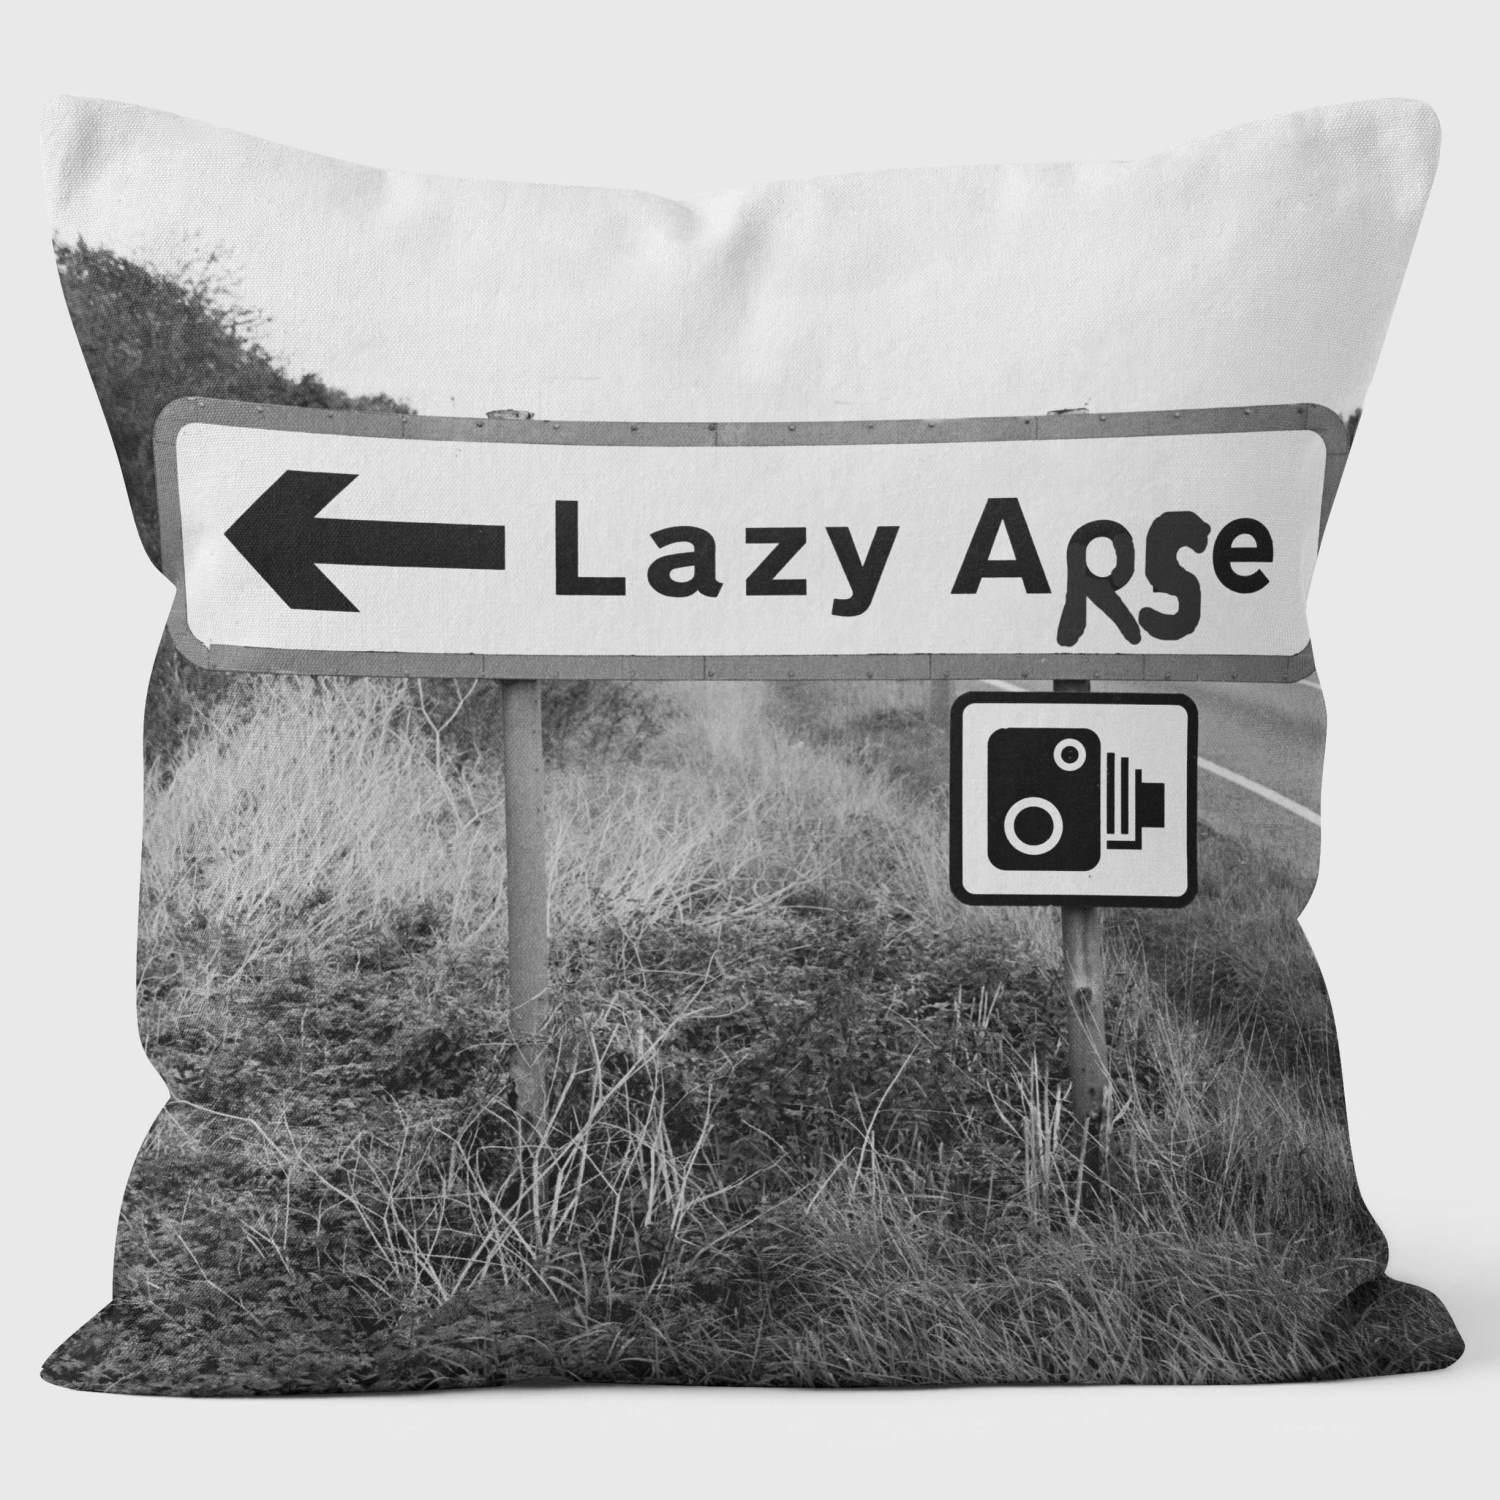 Lazy Arse - Lesser Spotted Britain Cushion - Handmade Cushions UK - WeLoveCushions